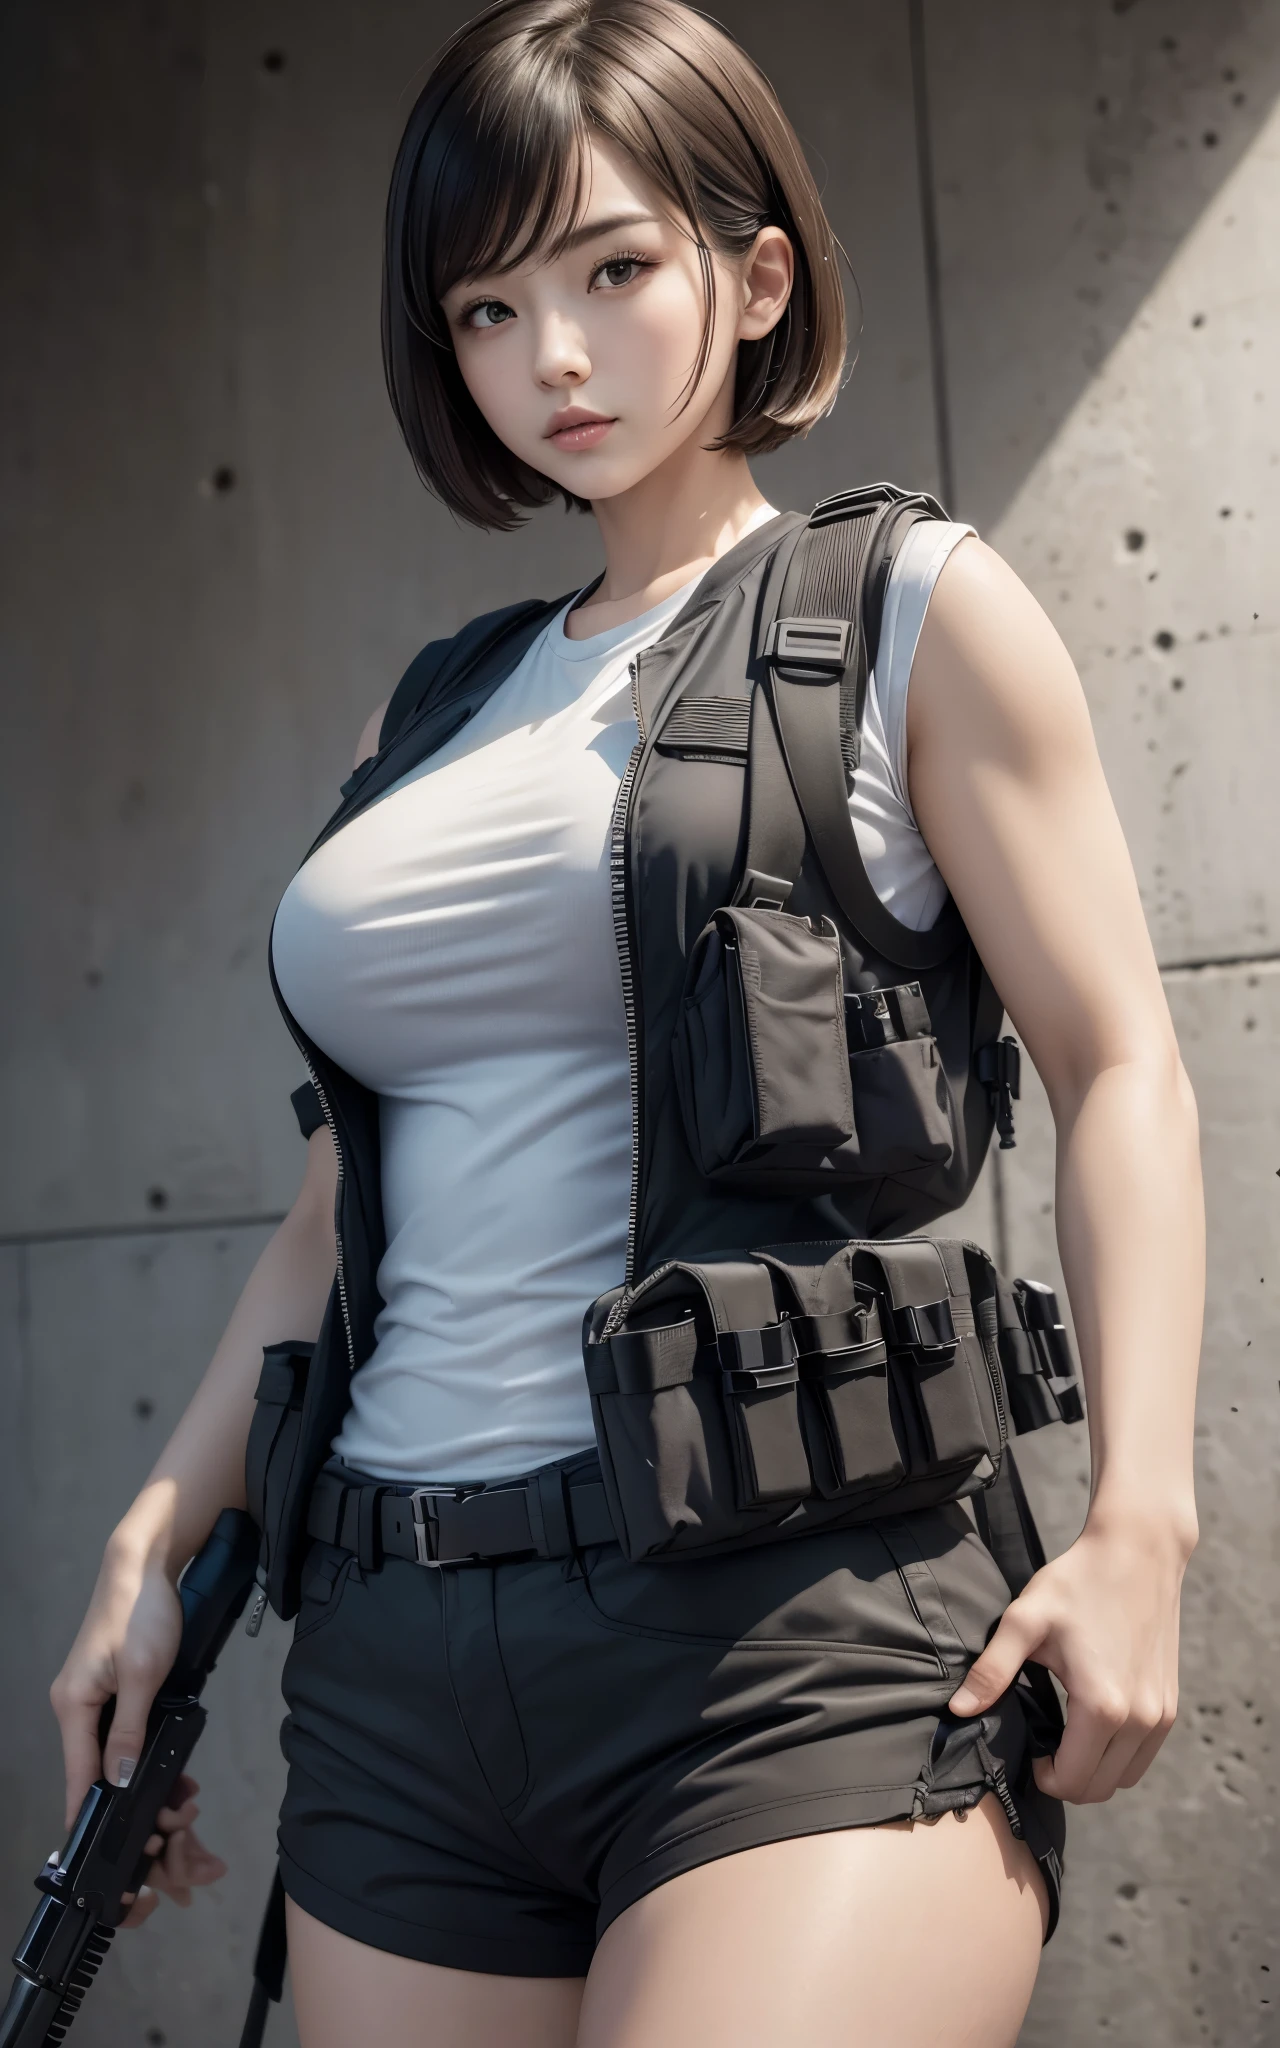 ((Best Quality, 8K, Masterpiece: 1.3)), ((best quality)), high resolution, photorealistic, photorealism, 1girl aiming with an  assault rifle, plump and musclar, Combat pose, looking to the camera, (Detailed face), short hair, nylon short pants, tactical vests, military harness, Gun,black gloves, high-tech headset, Fingers are occluded, concrete wall background,